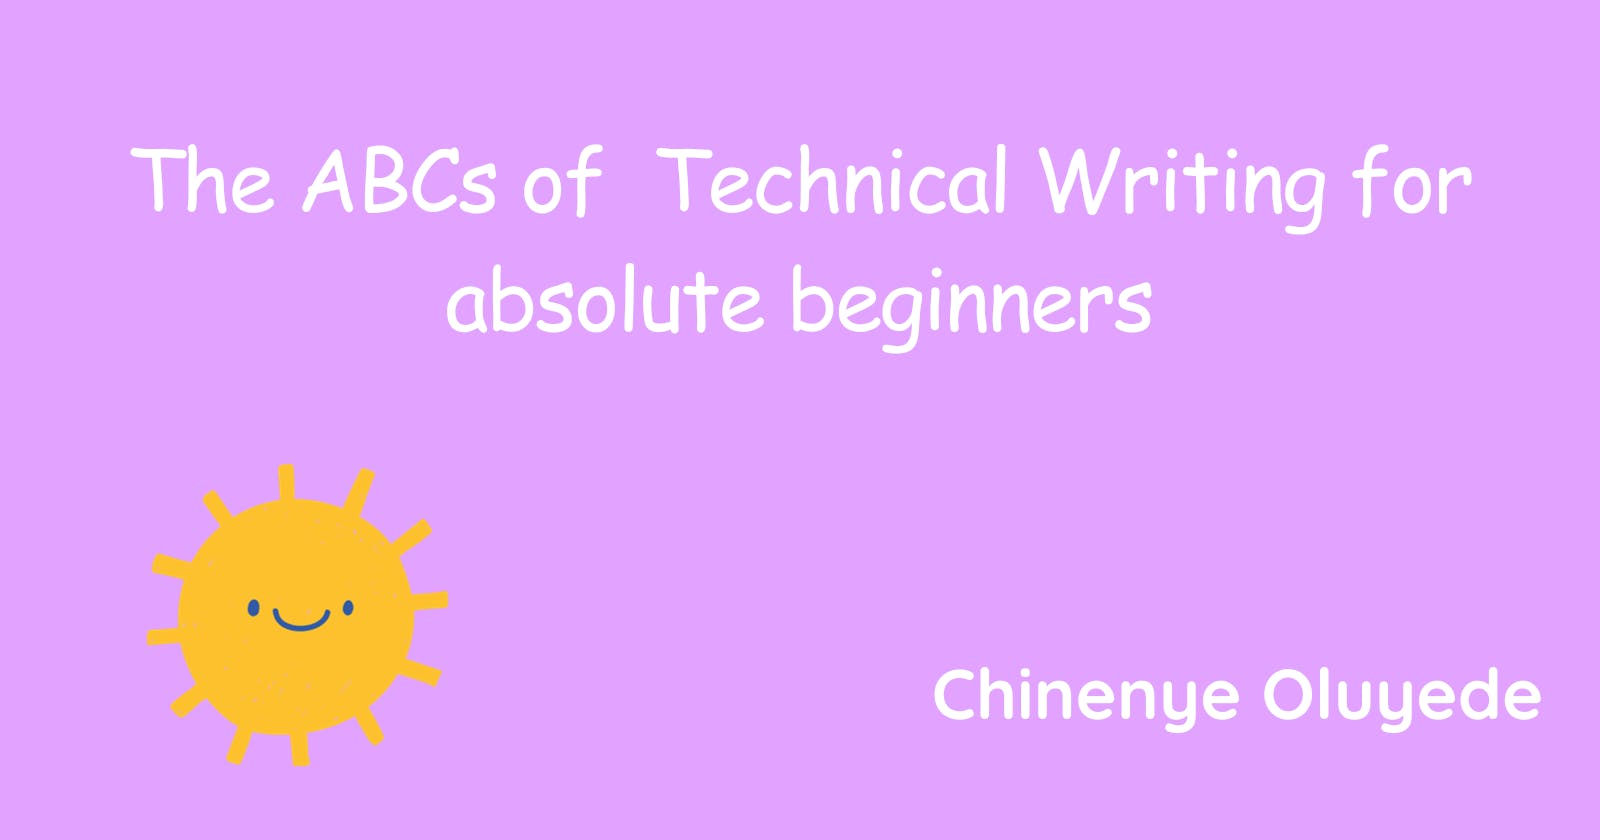 A beginner's guide to technical writing